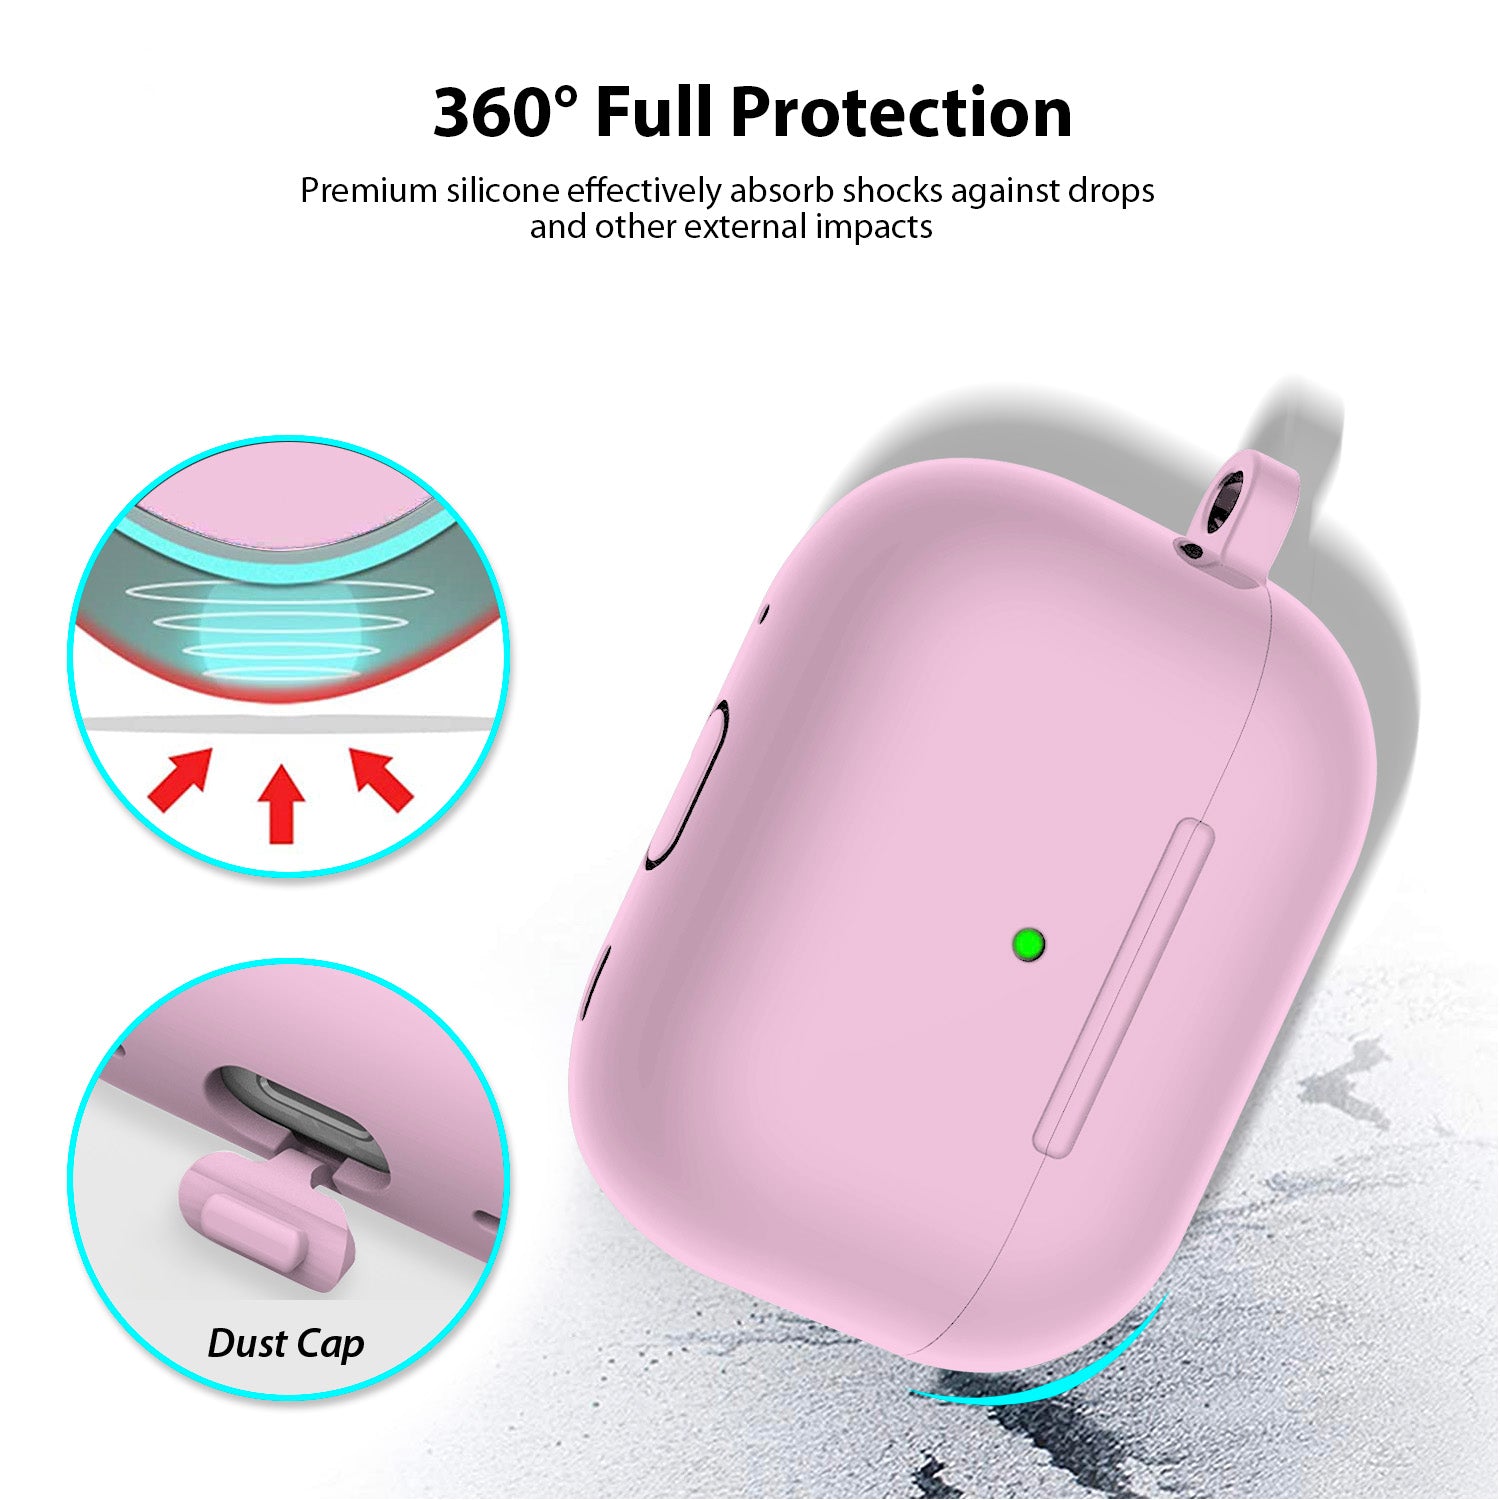 Tough On Apple AirPods Pro 2 Triple-Layer Protective Silicone Case Light Purple